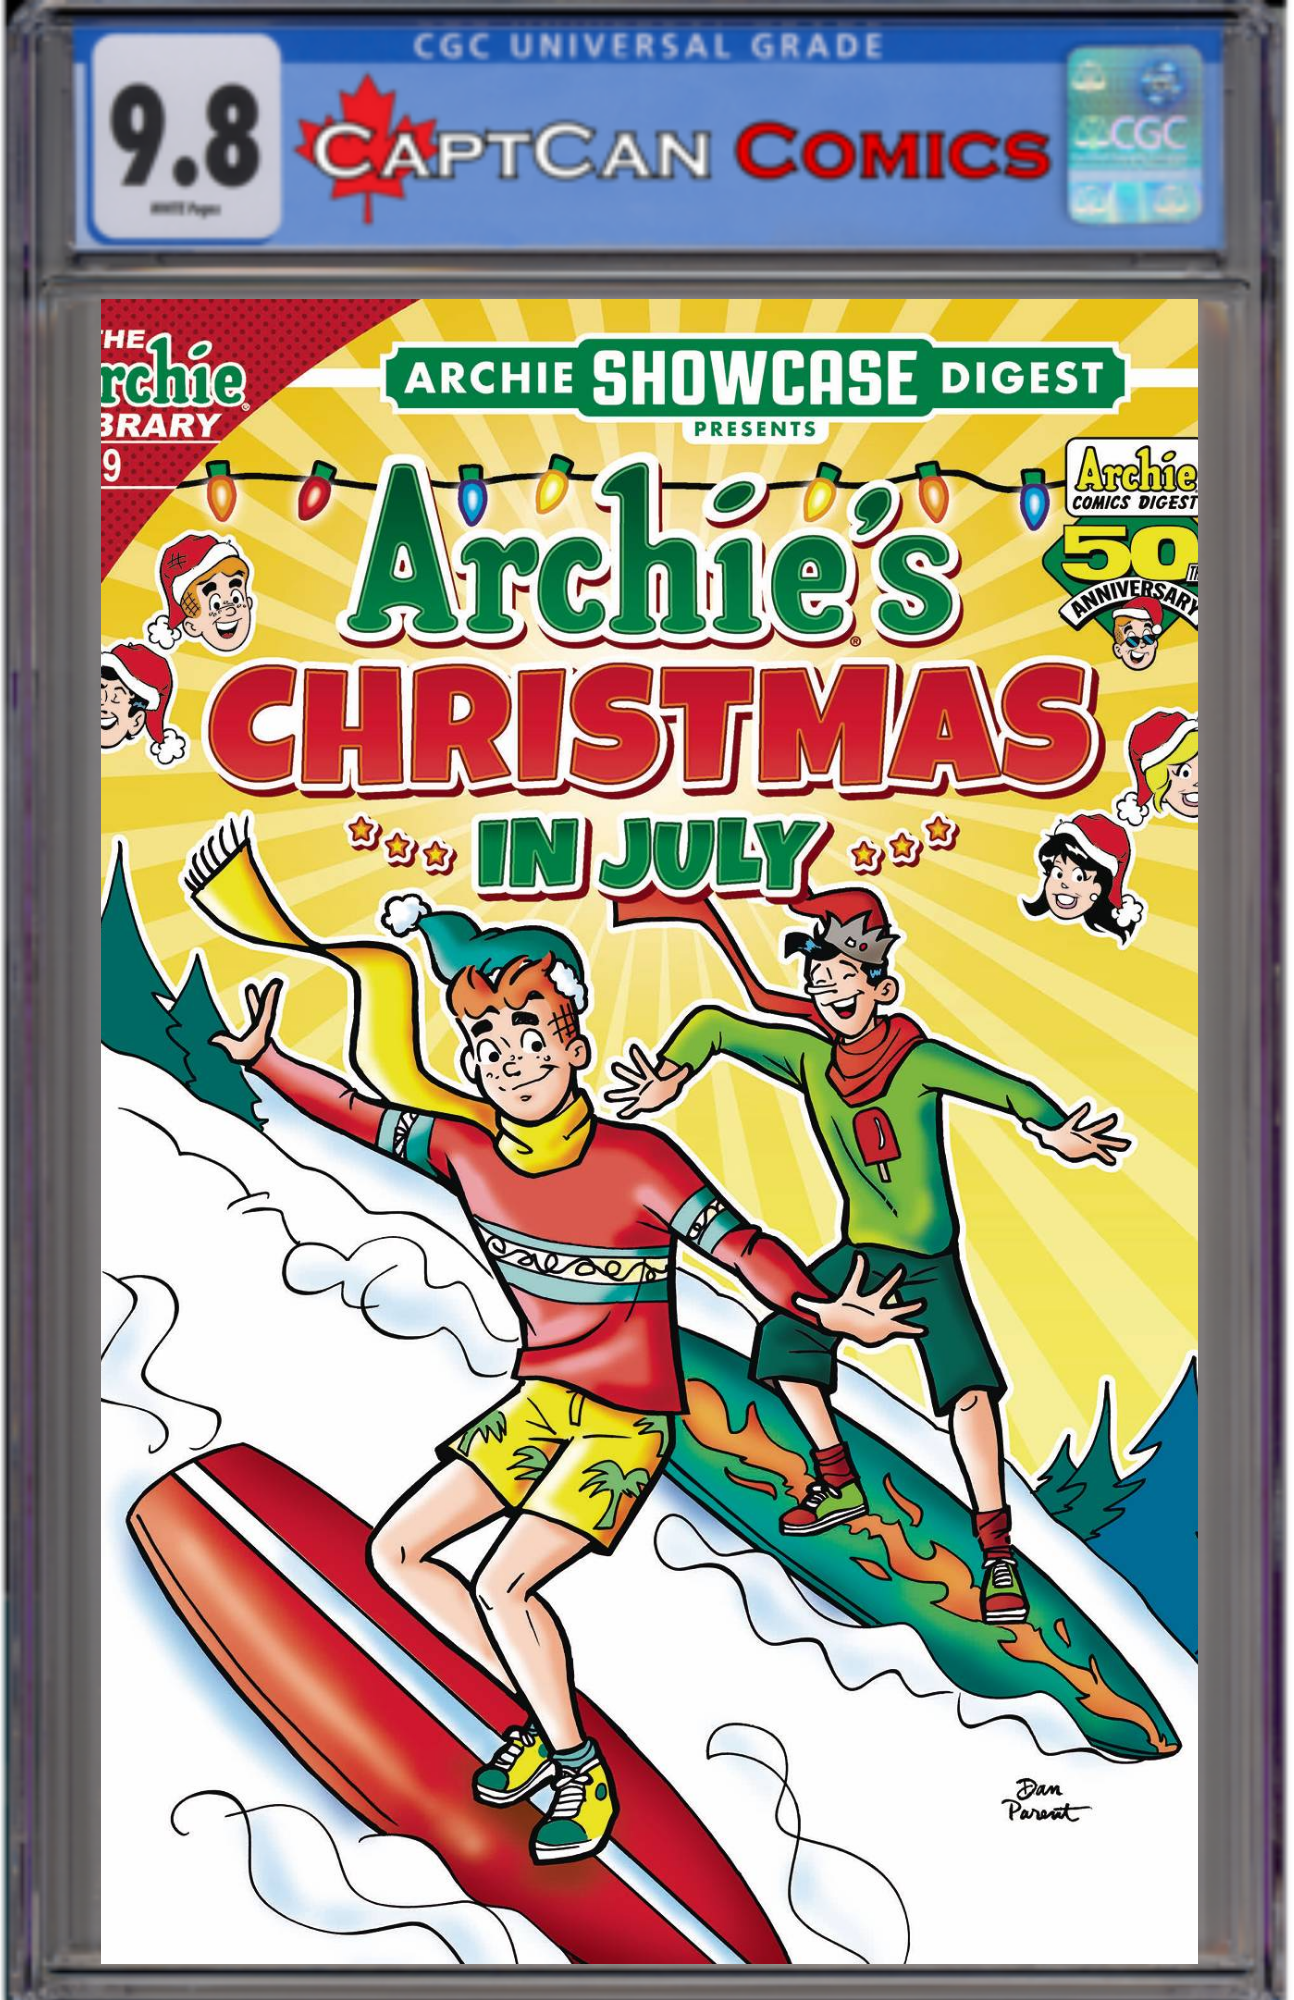 ARCHIE SHOWCASE JUMBO DIGEST #19 CHRISTMAS IN JULY